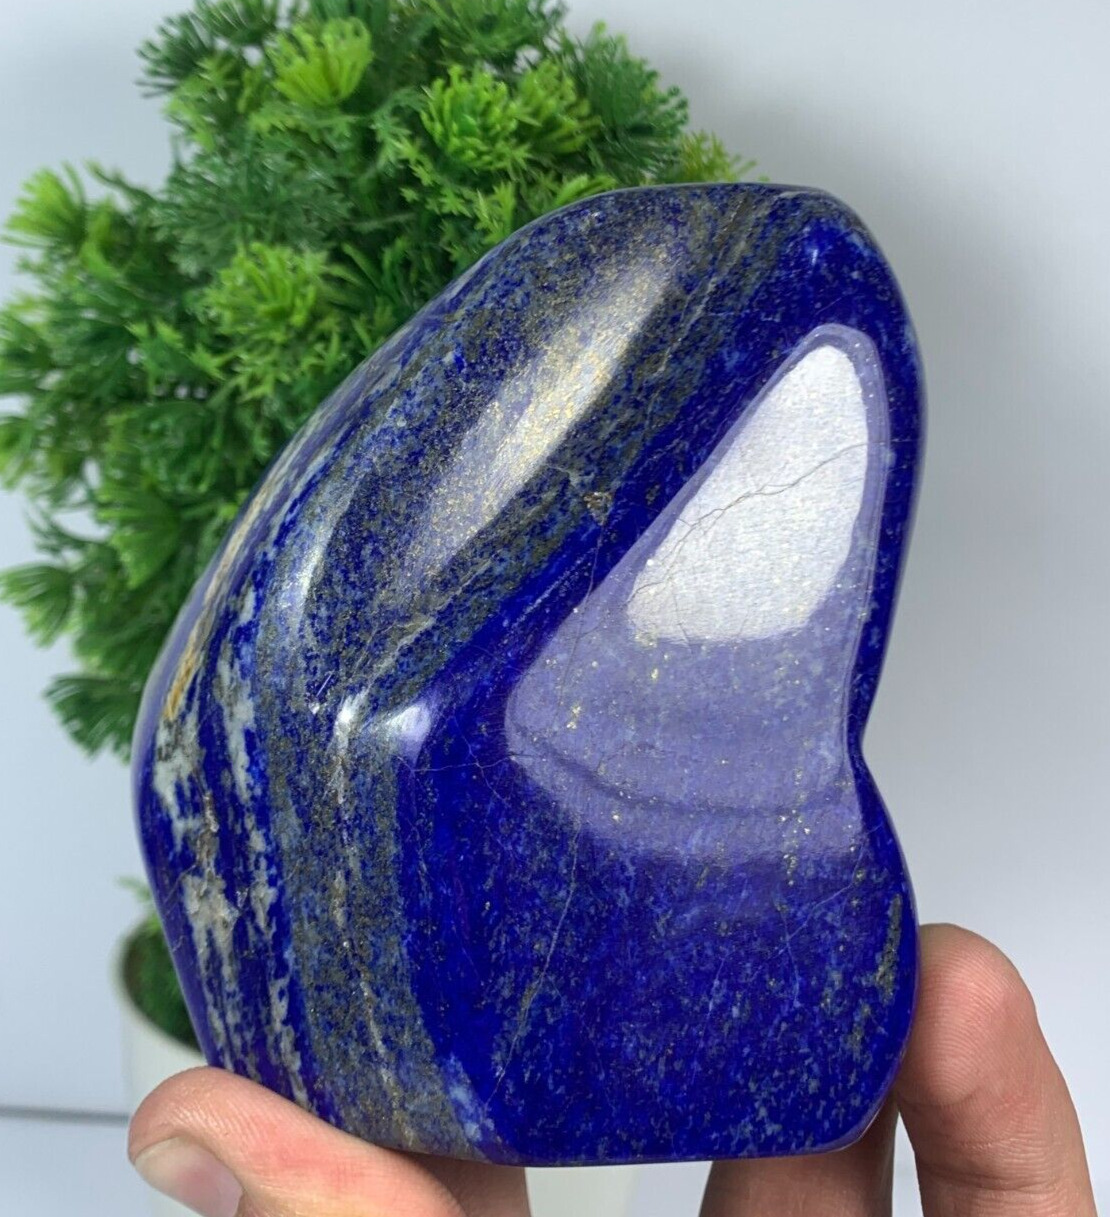 587Gram Lapis Lazuli Freeform Rough AAA+ Tumbled Rough Polished From Afghanistan